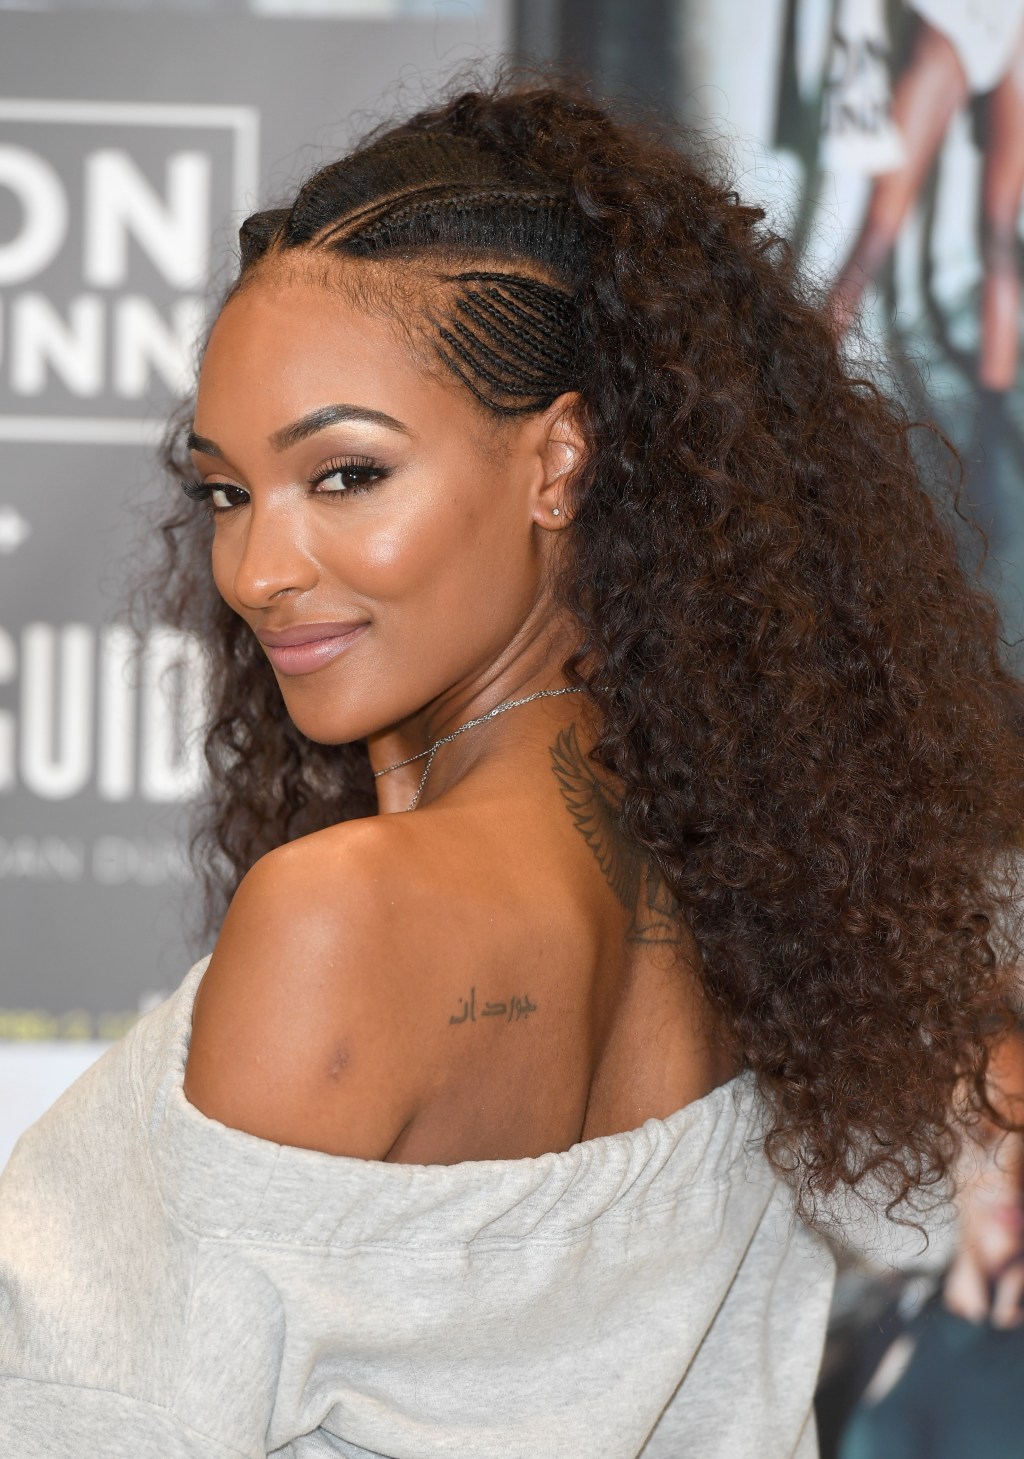 Jourdan Dunn Celebrates The Launch Of The Lon Dunn+ Missguided Collection At Missguided's Westfield Store